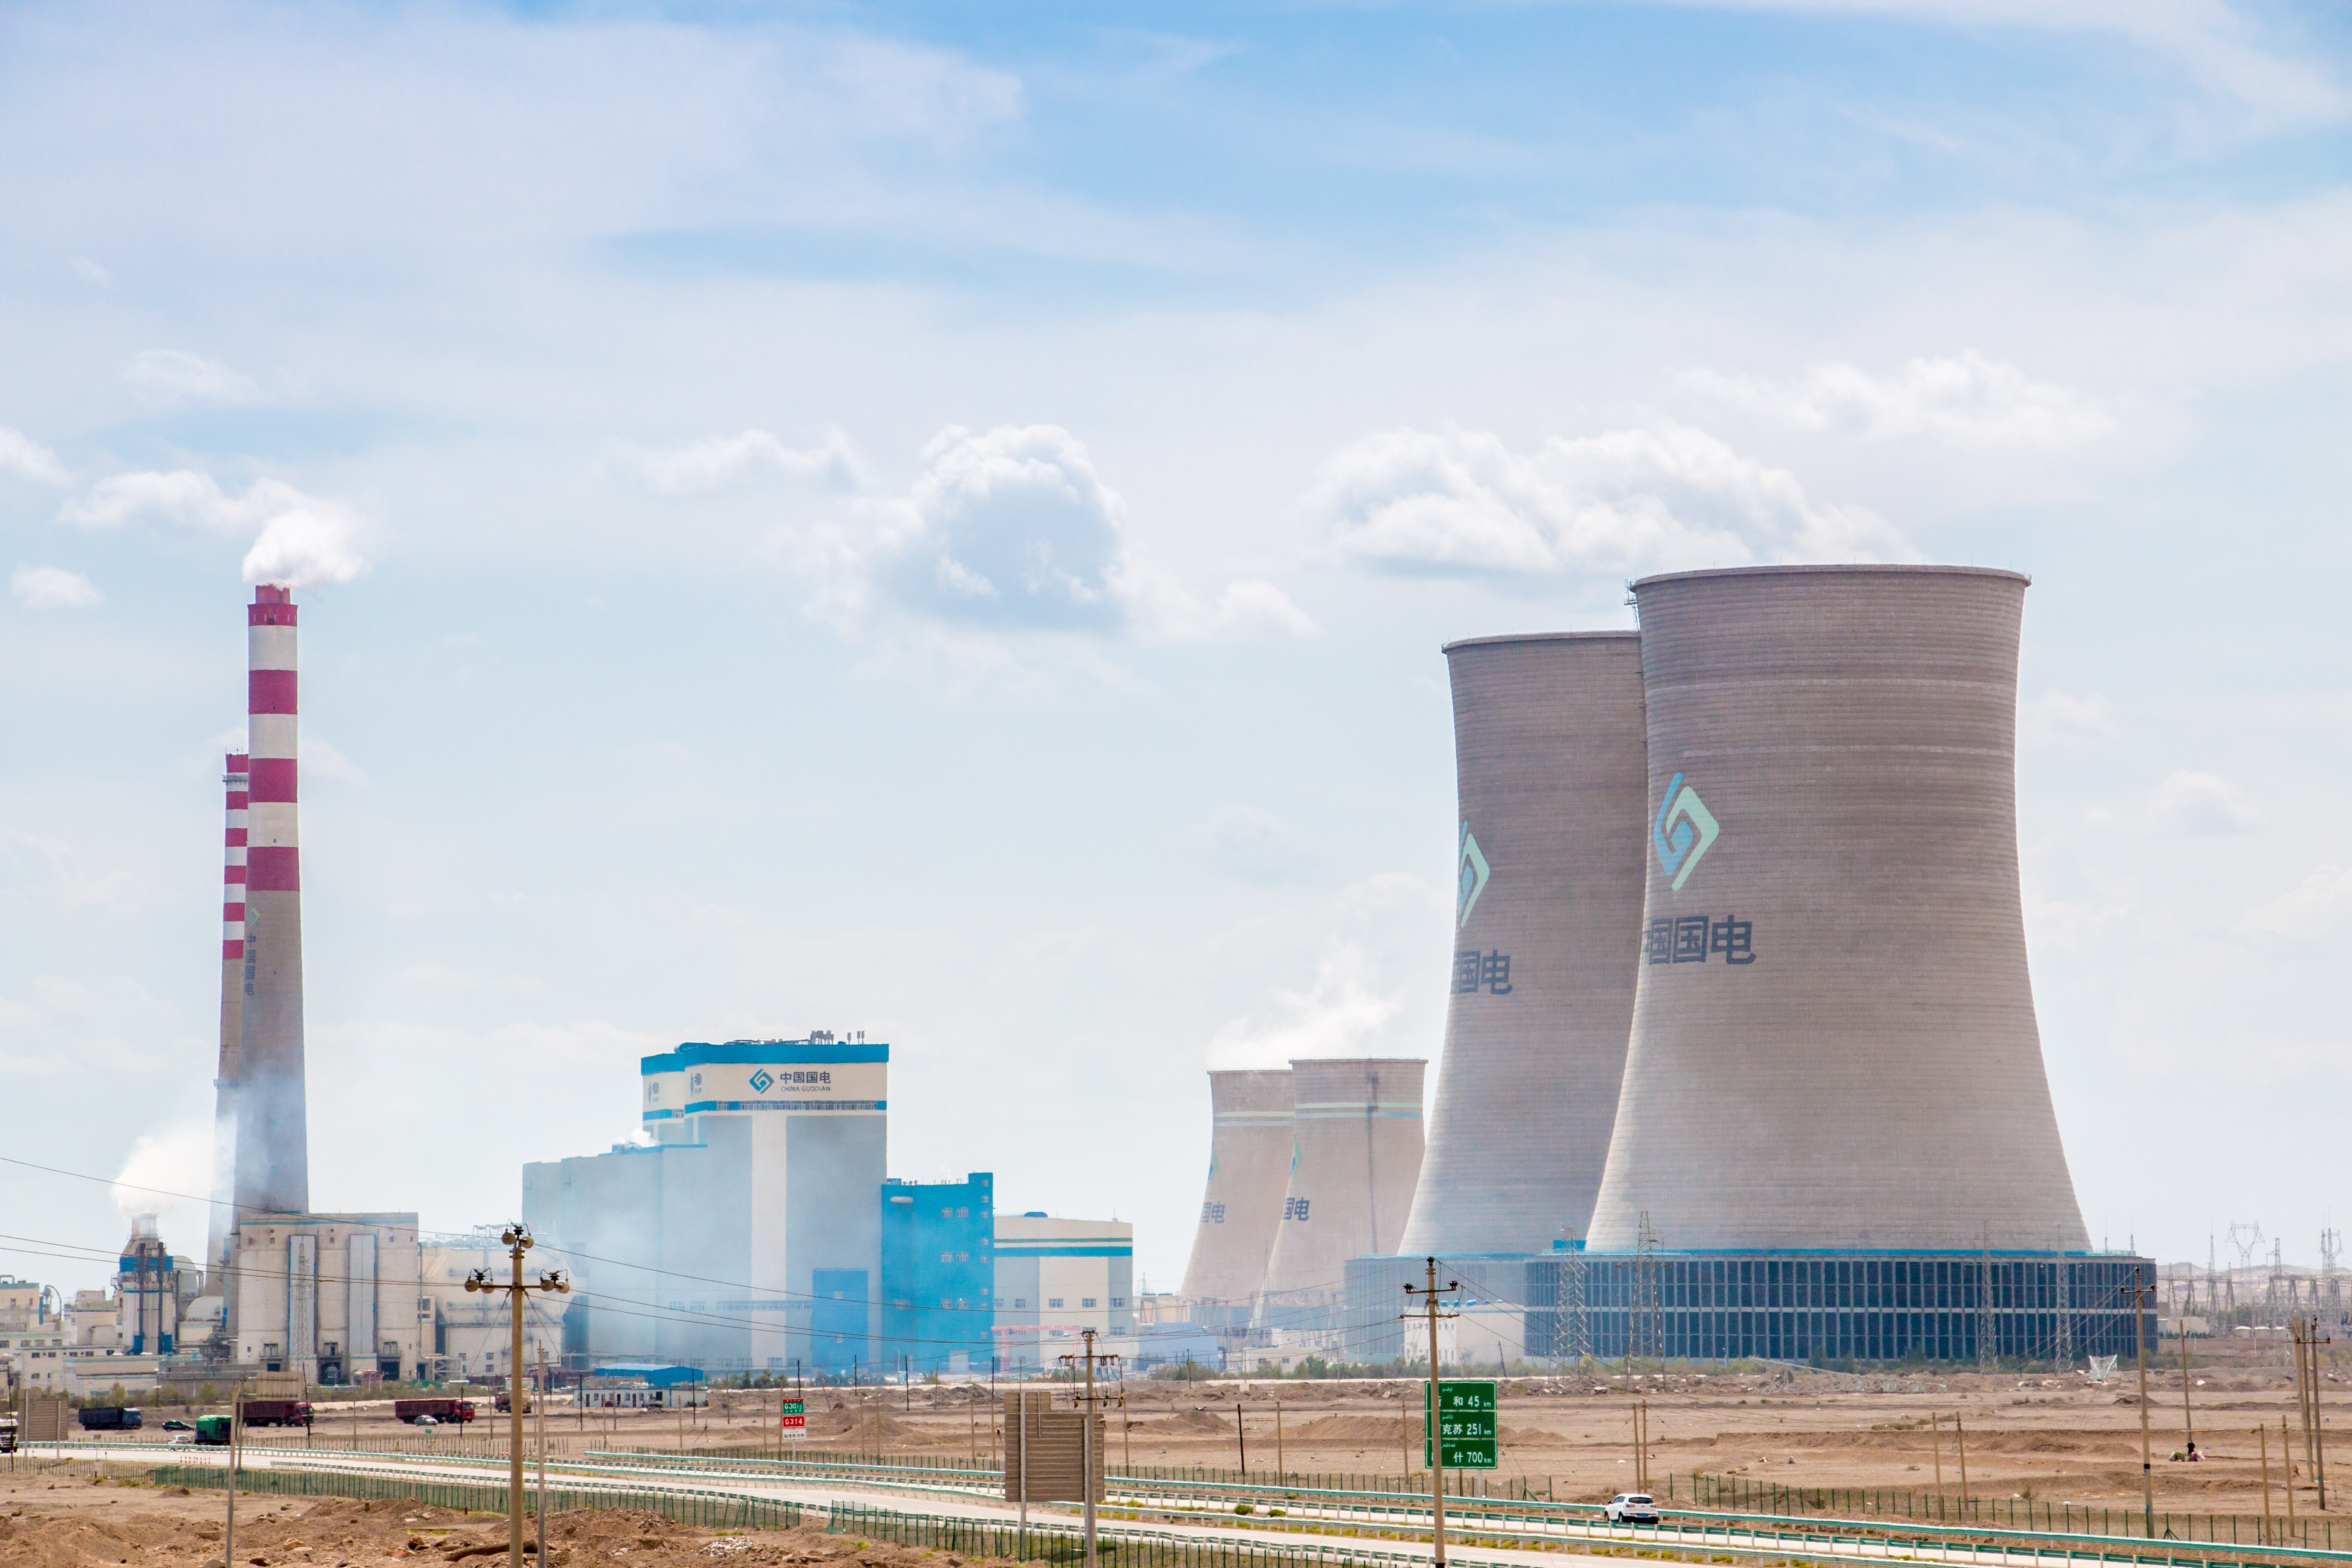 China has set new nuclear power targets for the next five years after failing to meet its 2020 goals. Photo: Shutterstock